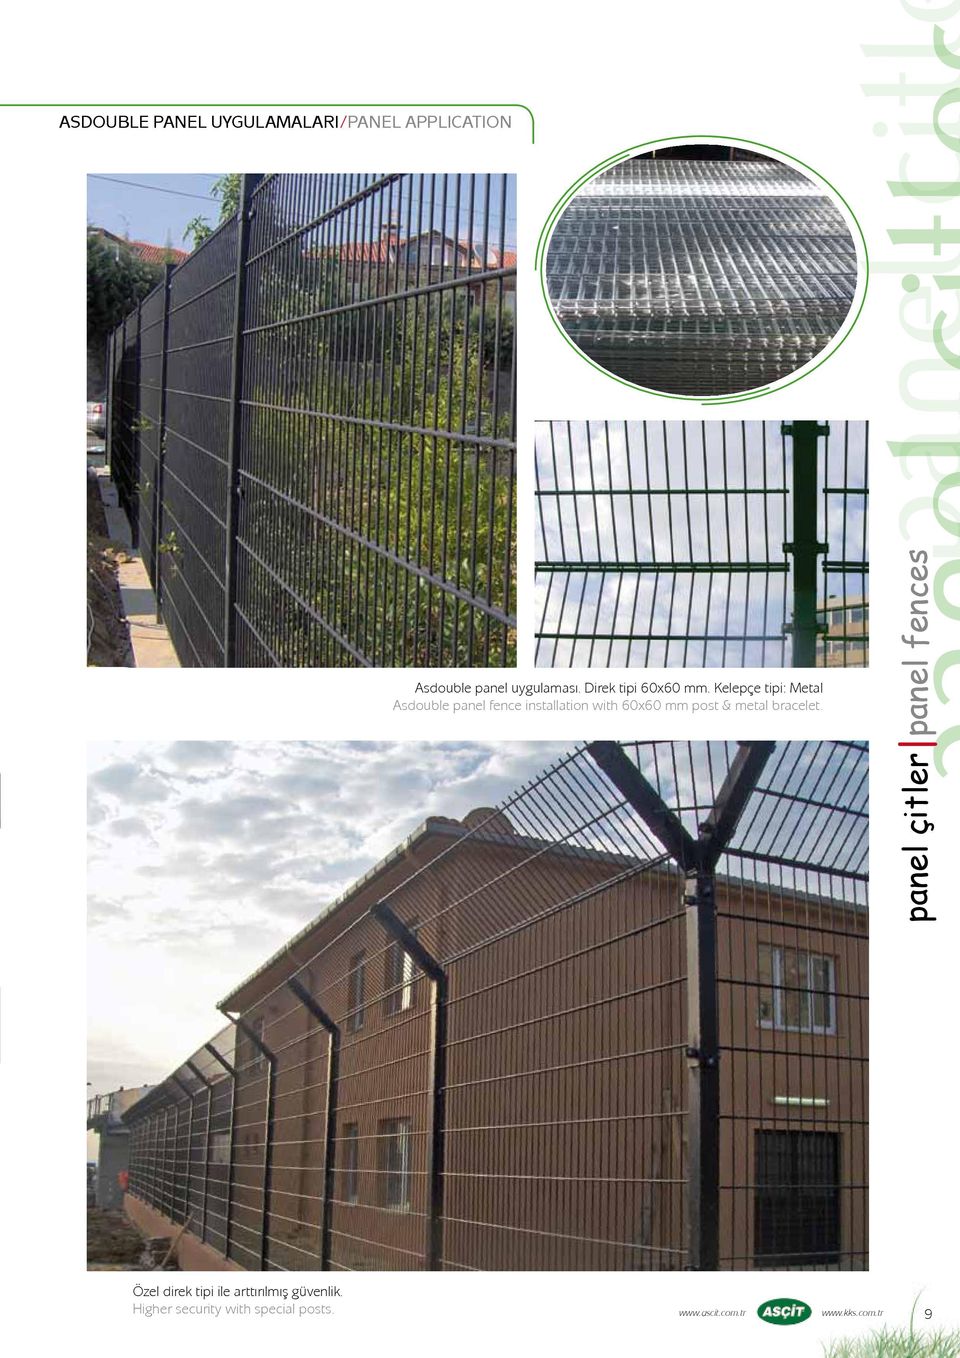 Kelepçe tipi: Metal Asdouble panel fence installation with 60x60 mm post & metal